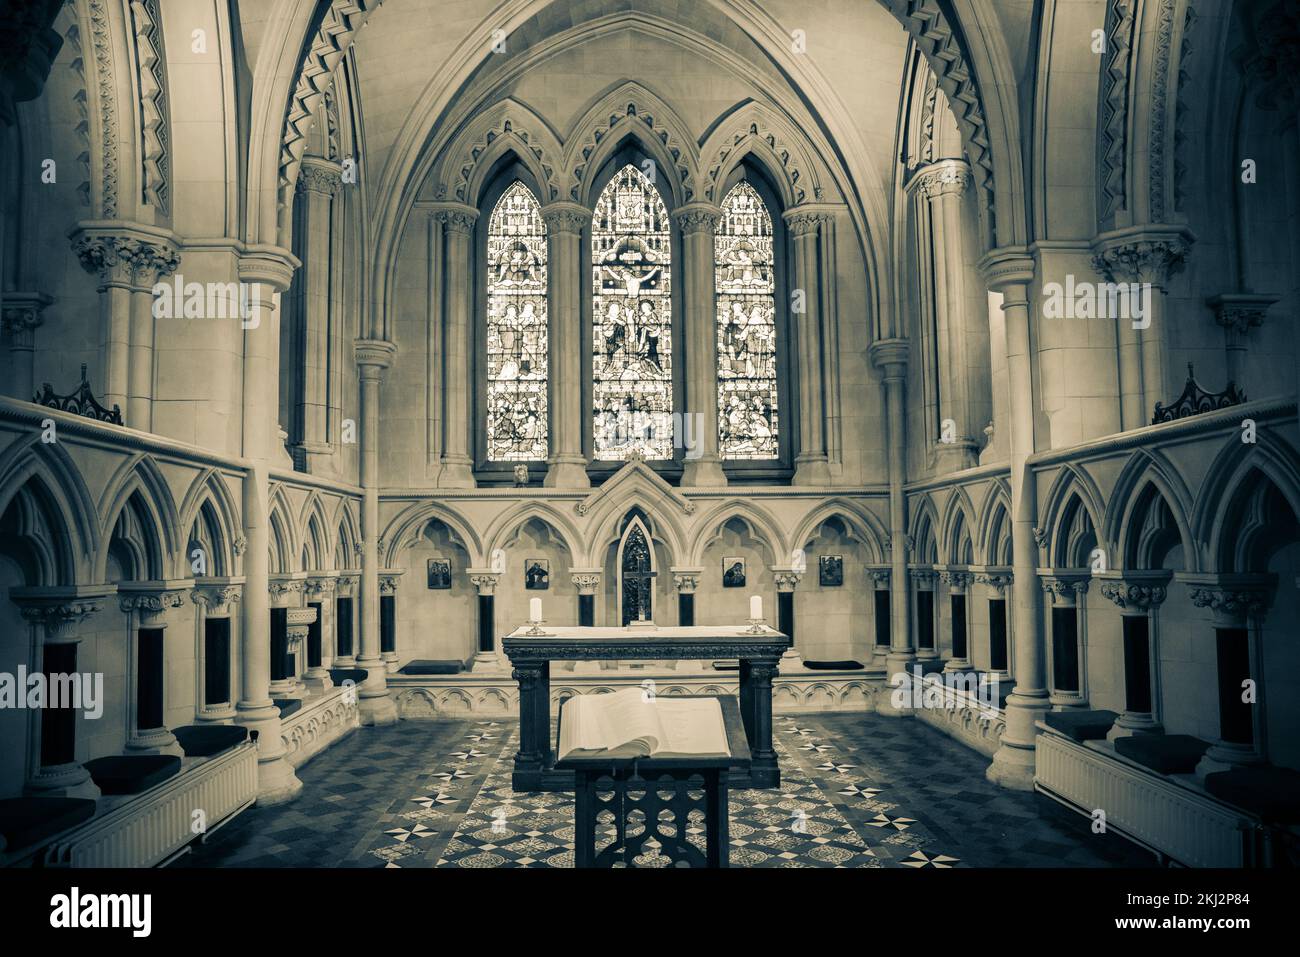 Irland, Dublin, Saint Patrick's Cathedral in Dublin, Irland, gegründet 1191, ist die National Cathedral of the Church of Ireland. Stockfoto